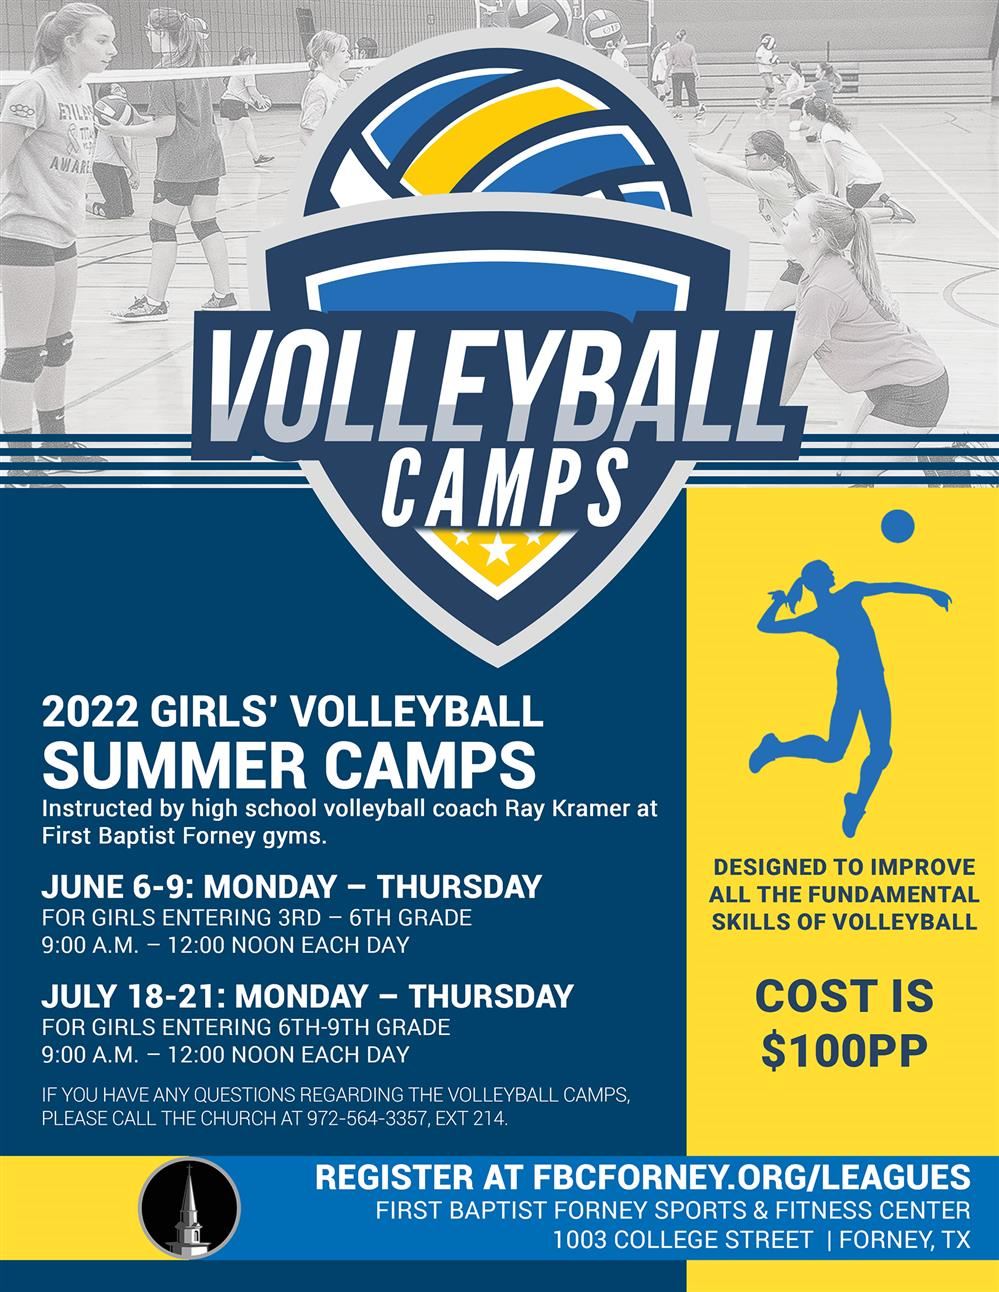 FBC Forney Volleyball Camp